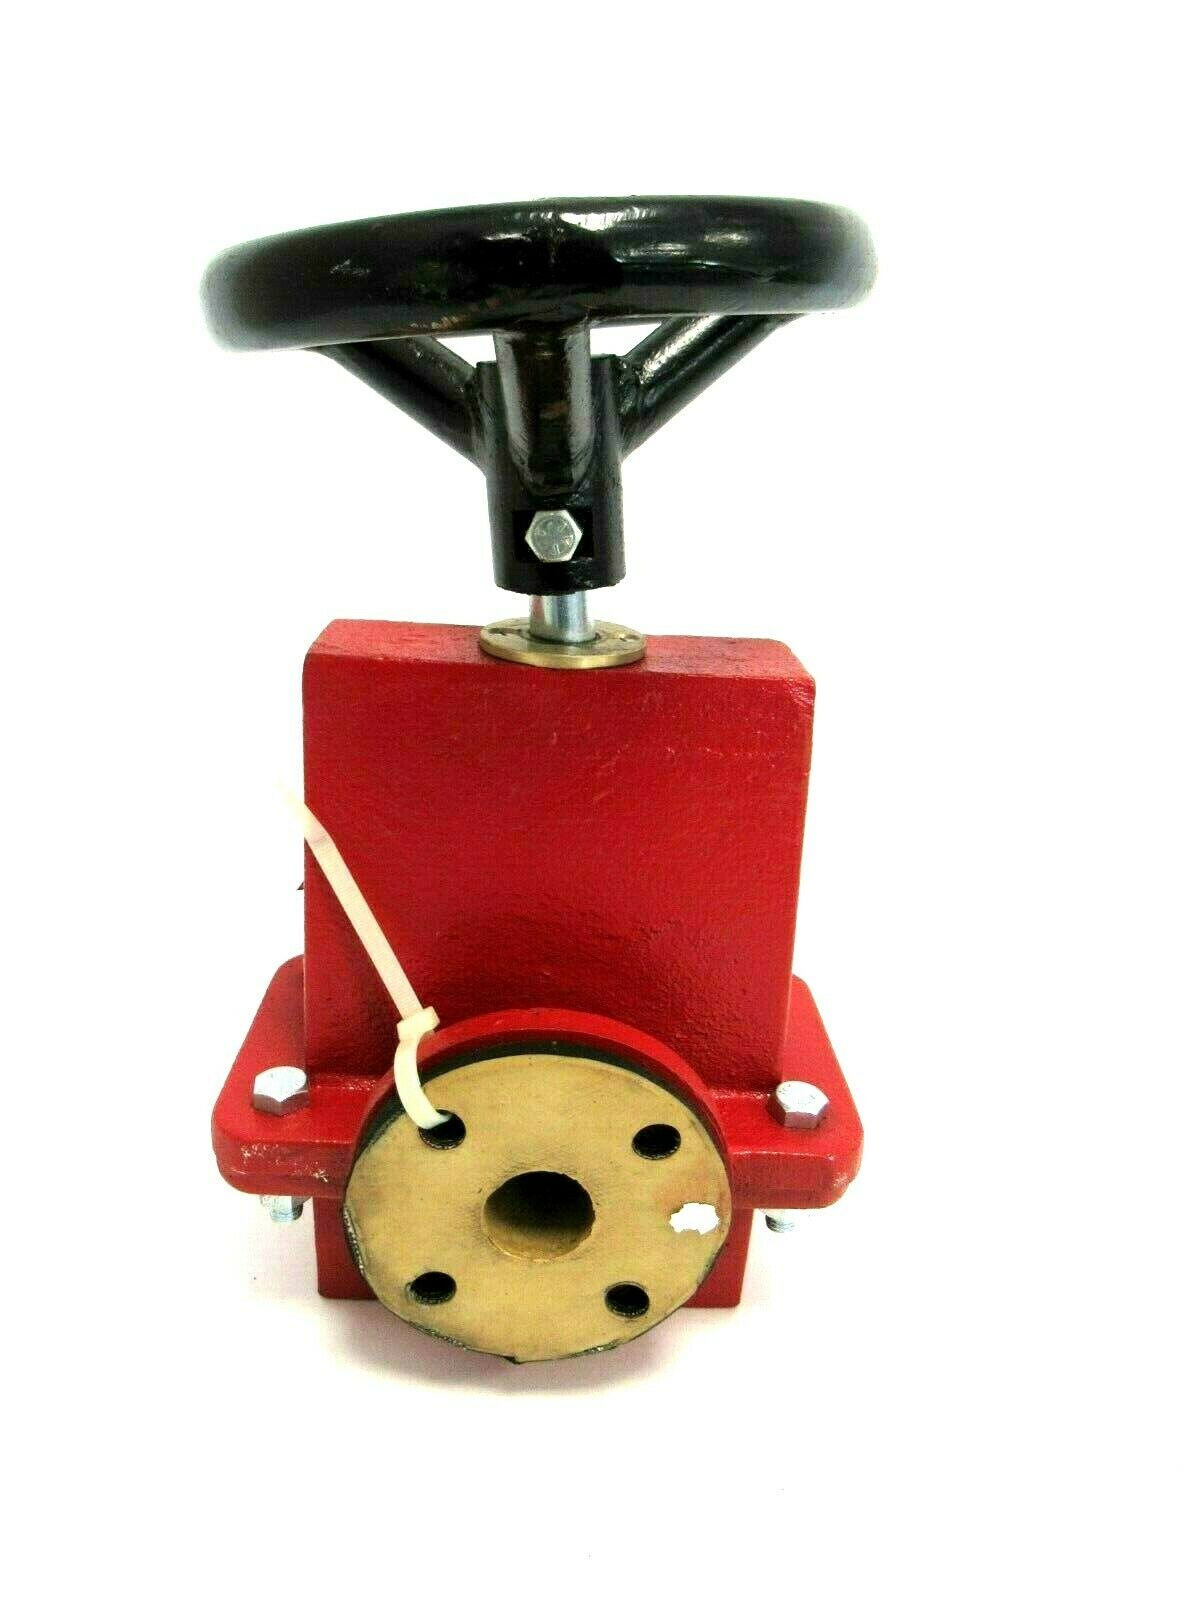 Details about   NEW RED VALVE 07-3573 PINCH VALVE 75 SERIES SIZE 1.5" 073573